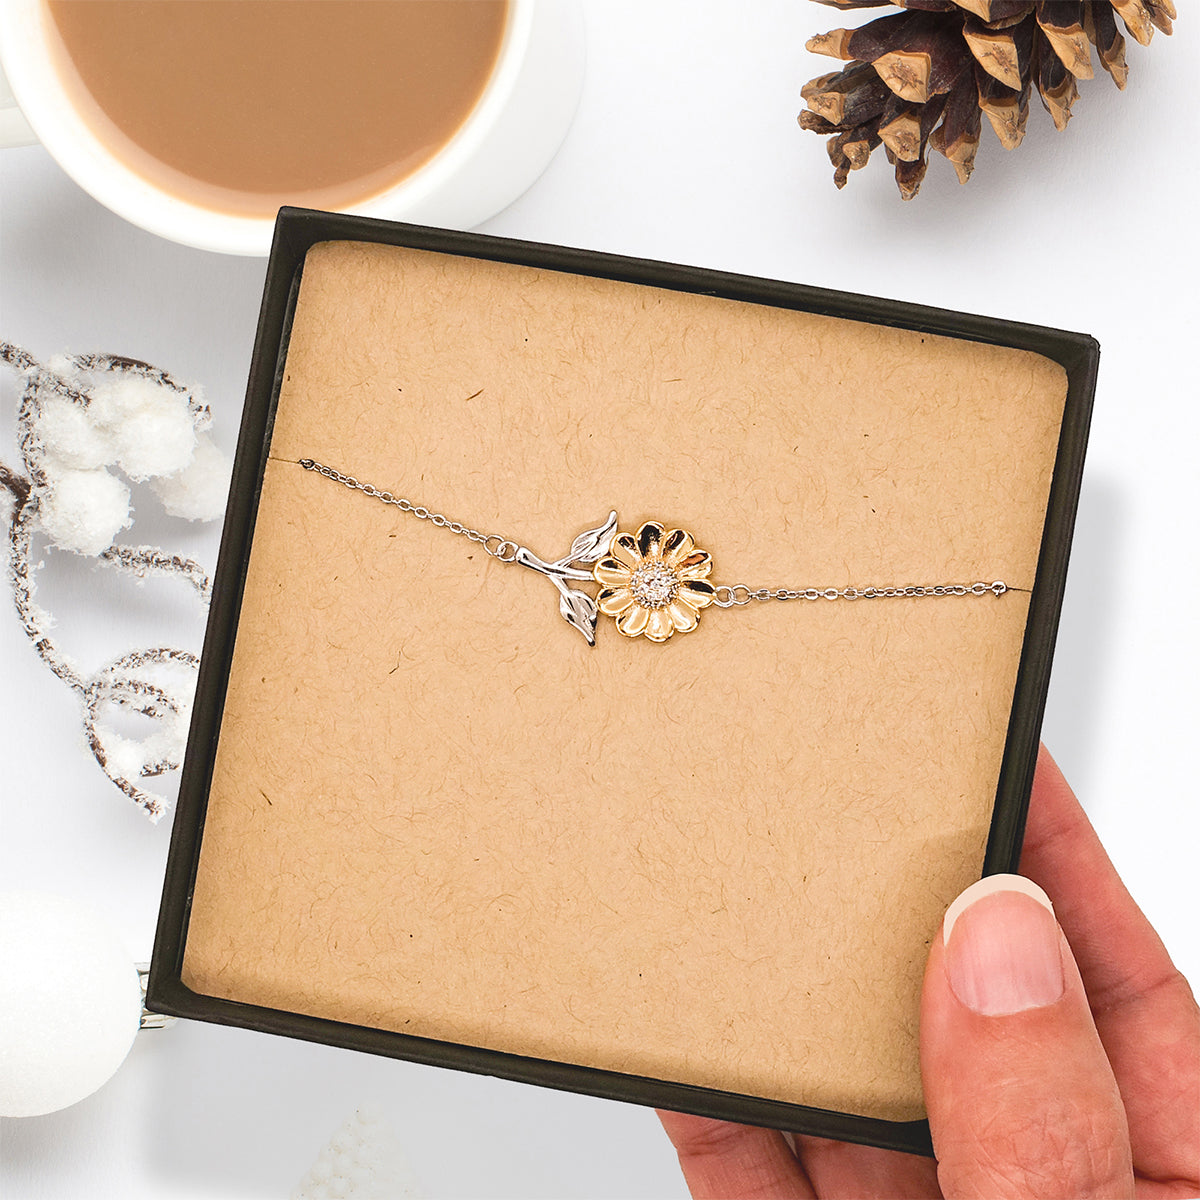 Engraved Sunflower Bracelet for Fiancee - Youll Always Have a Special Place in My Heart - Perfect Gift for Christmas, Birthday, or Anniversary - Express Your Love and Confidence through this Unique, Inspirational Jewelry